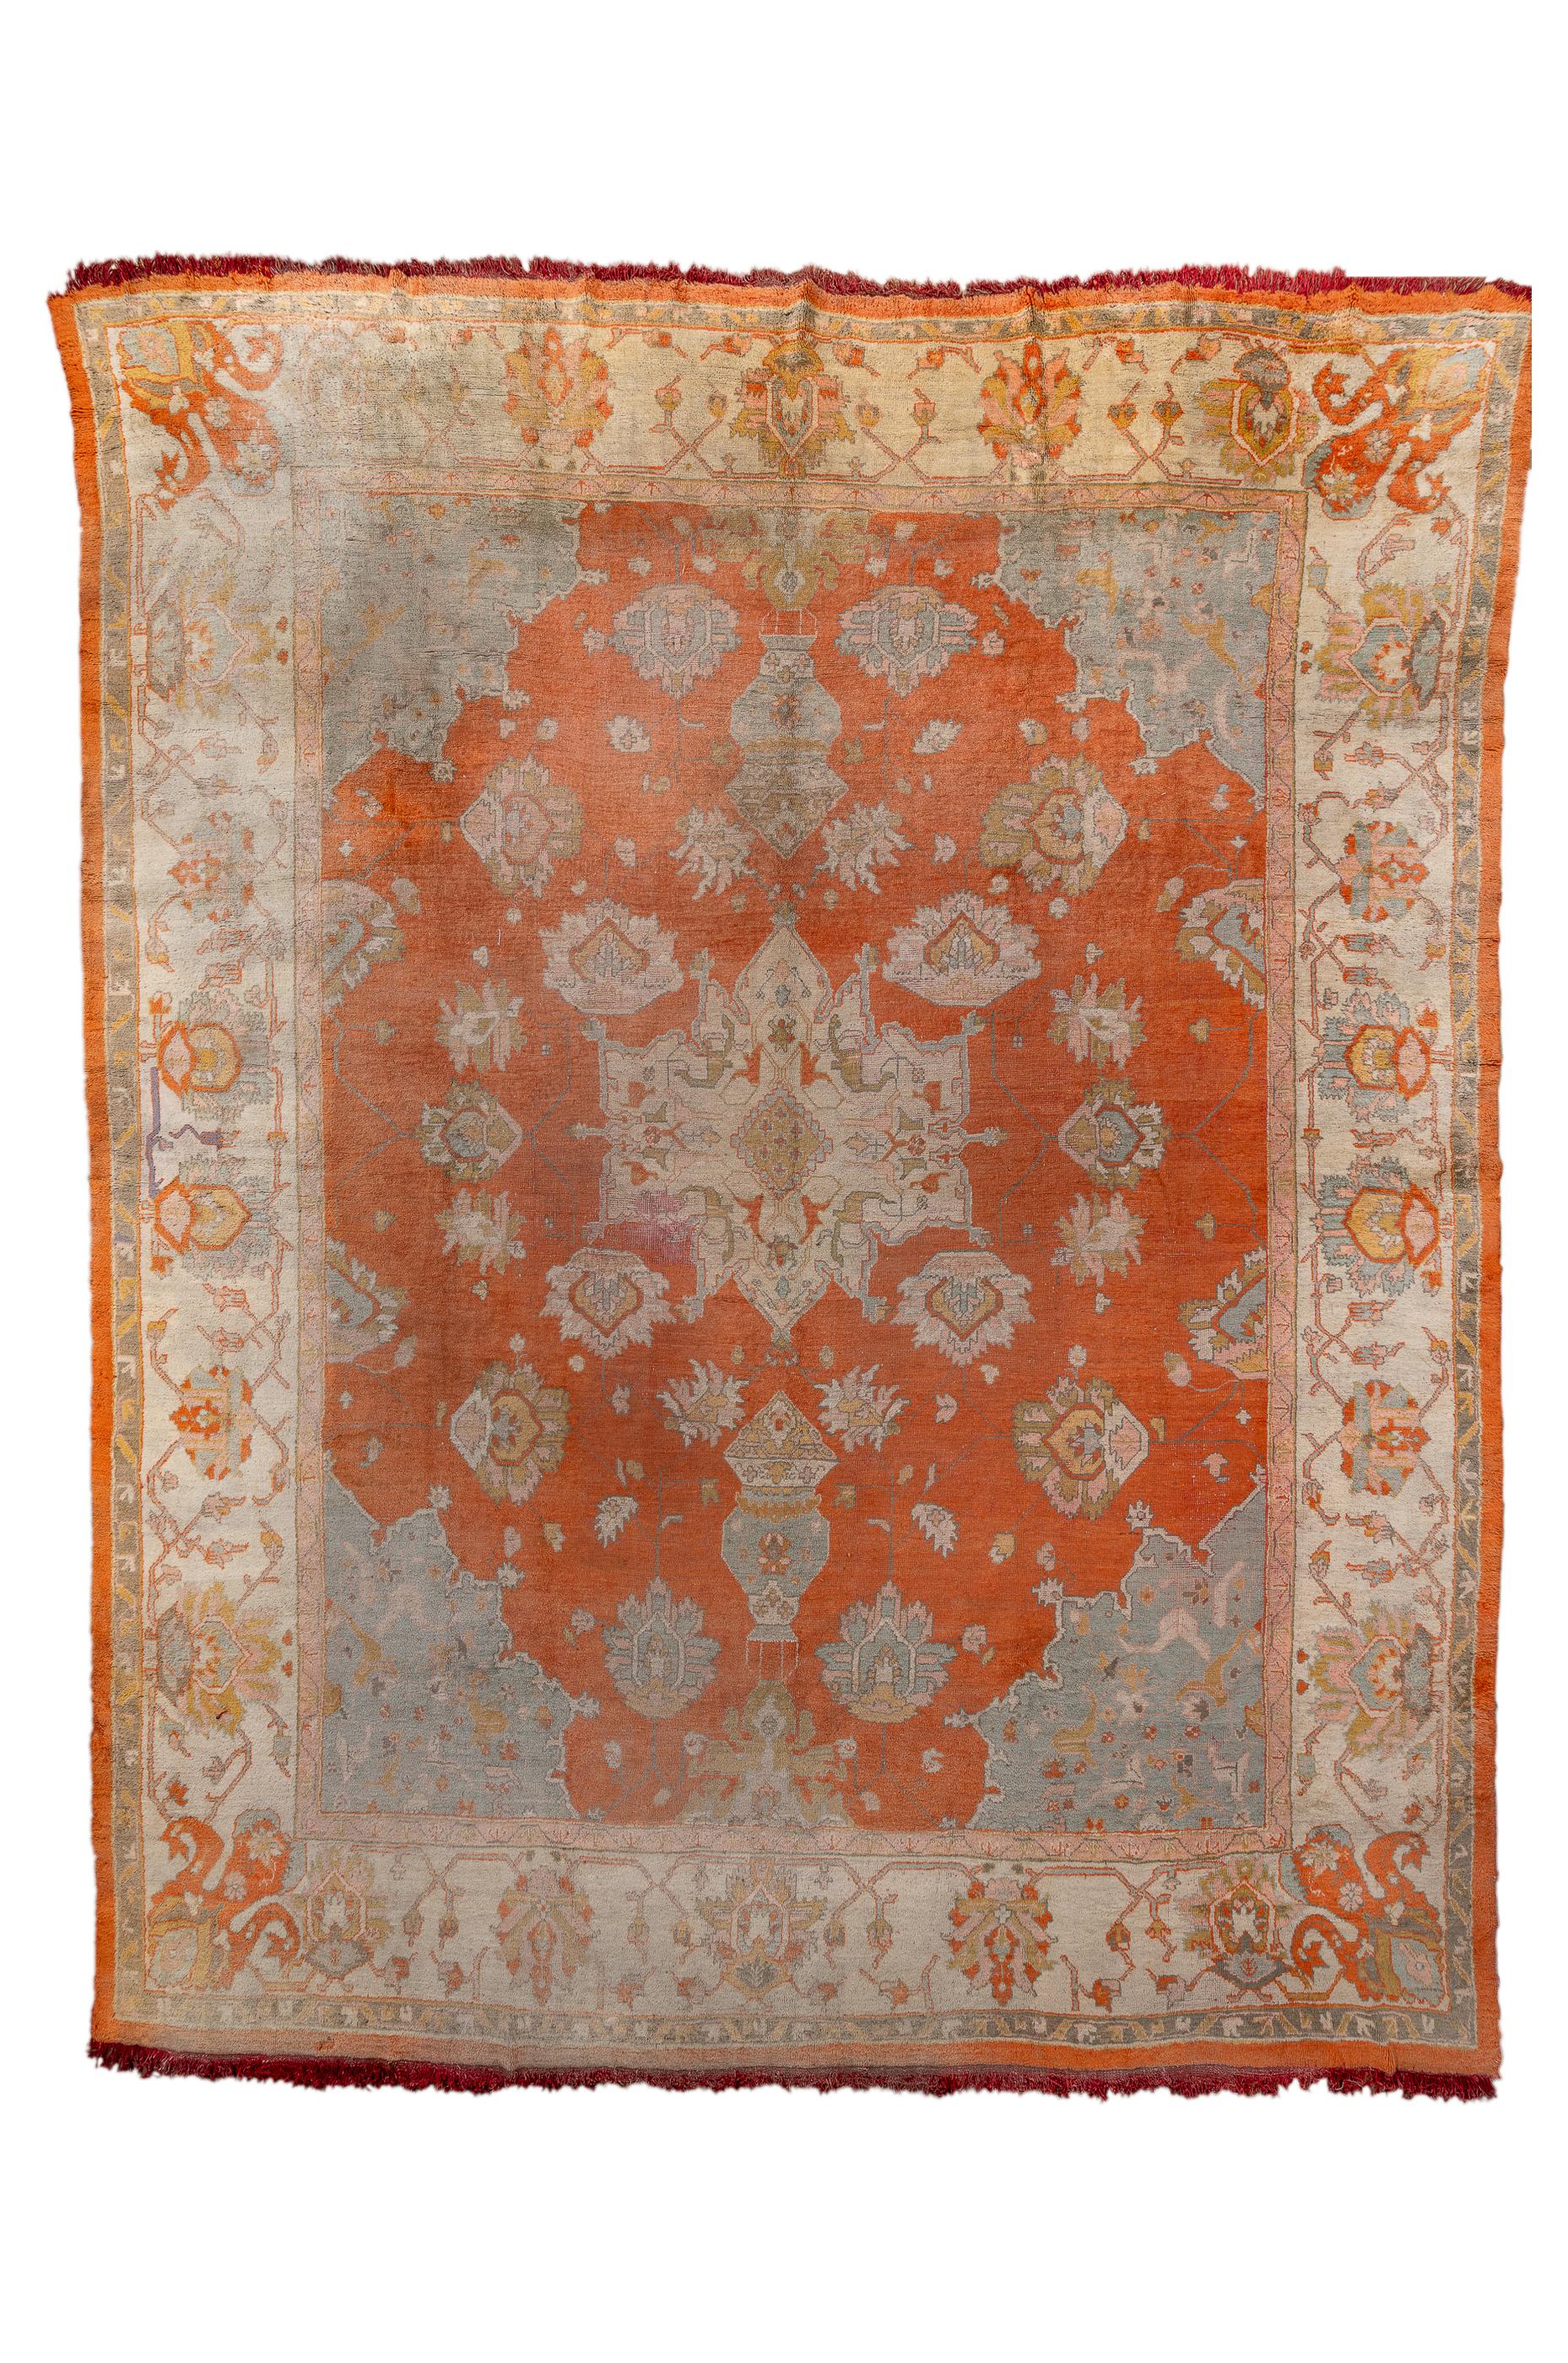 Made to compete with Persian Herizes, this Anatolian large room size carpet show a Turkey red field centred on a roughly octogrammoidal cream medallion, with convex  teal corners, two suspended mosque lamp pendants and a supporting school of mobile